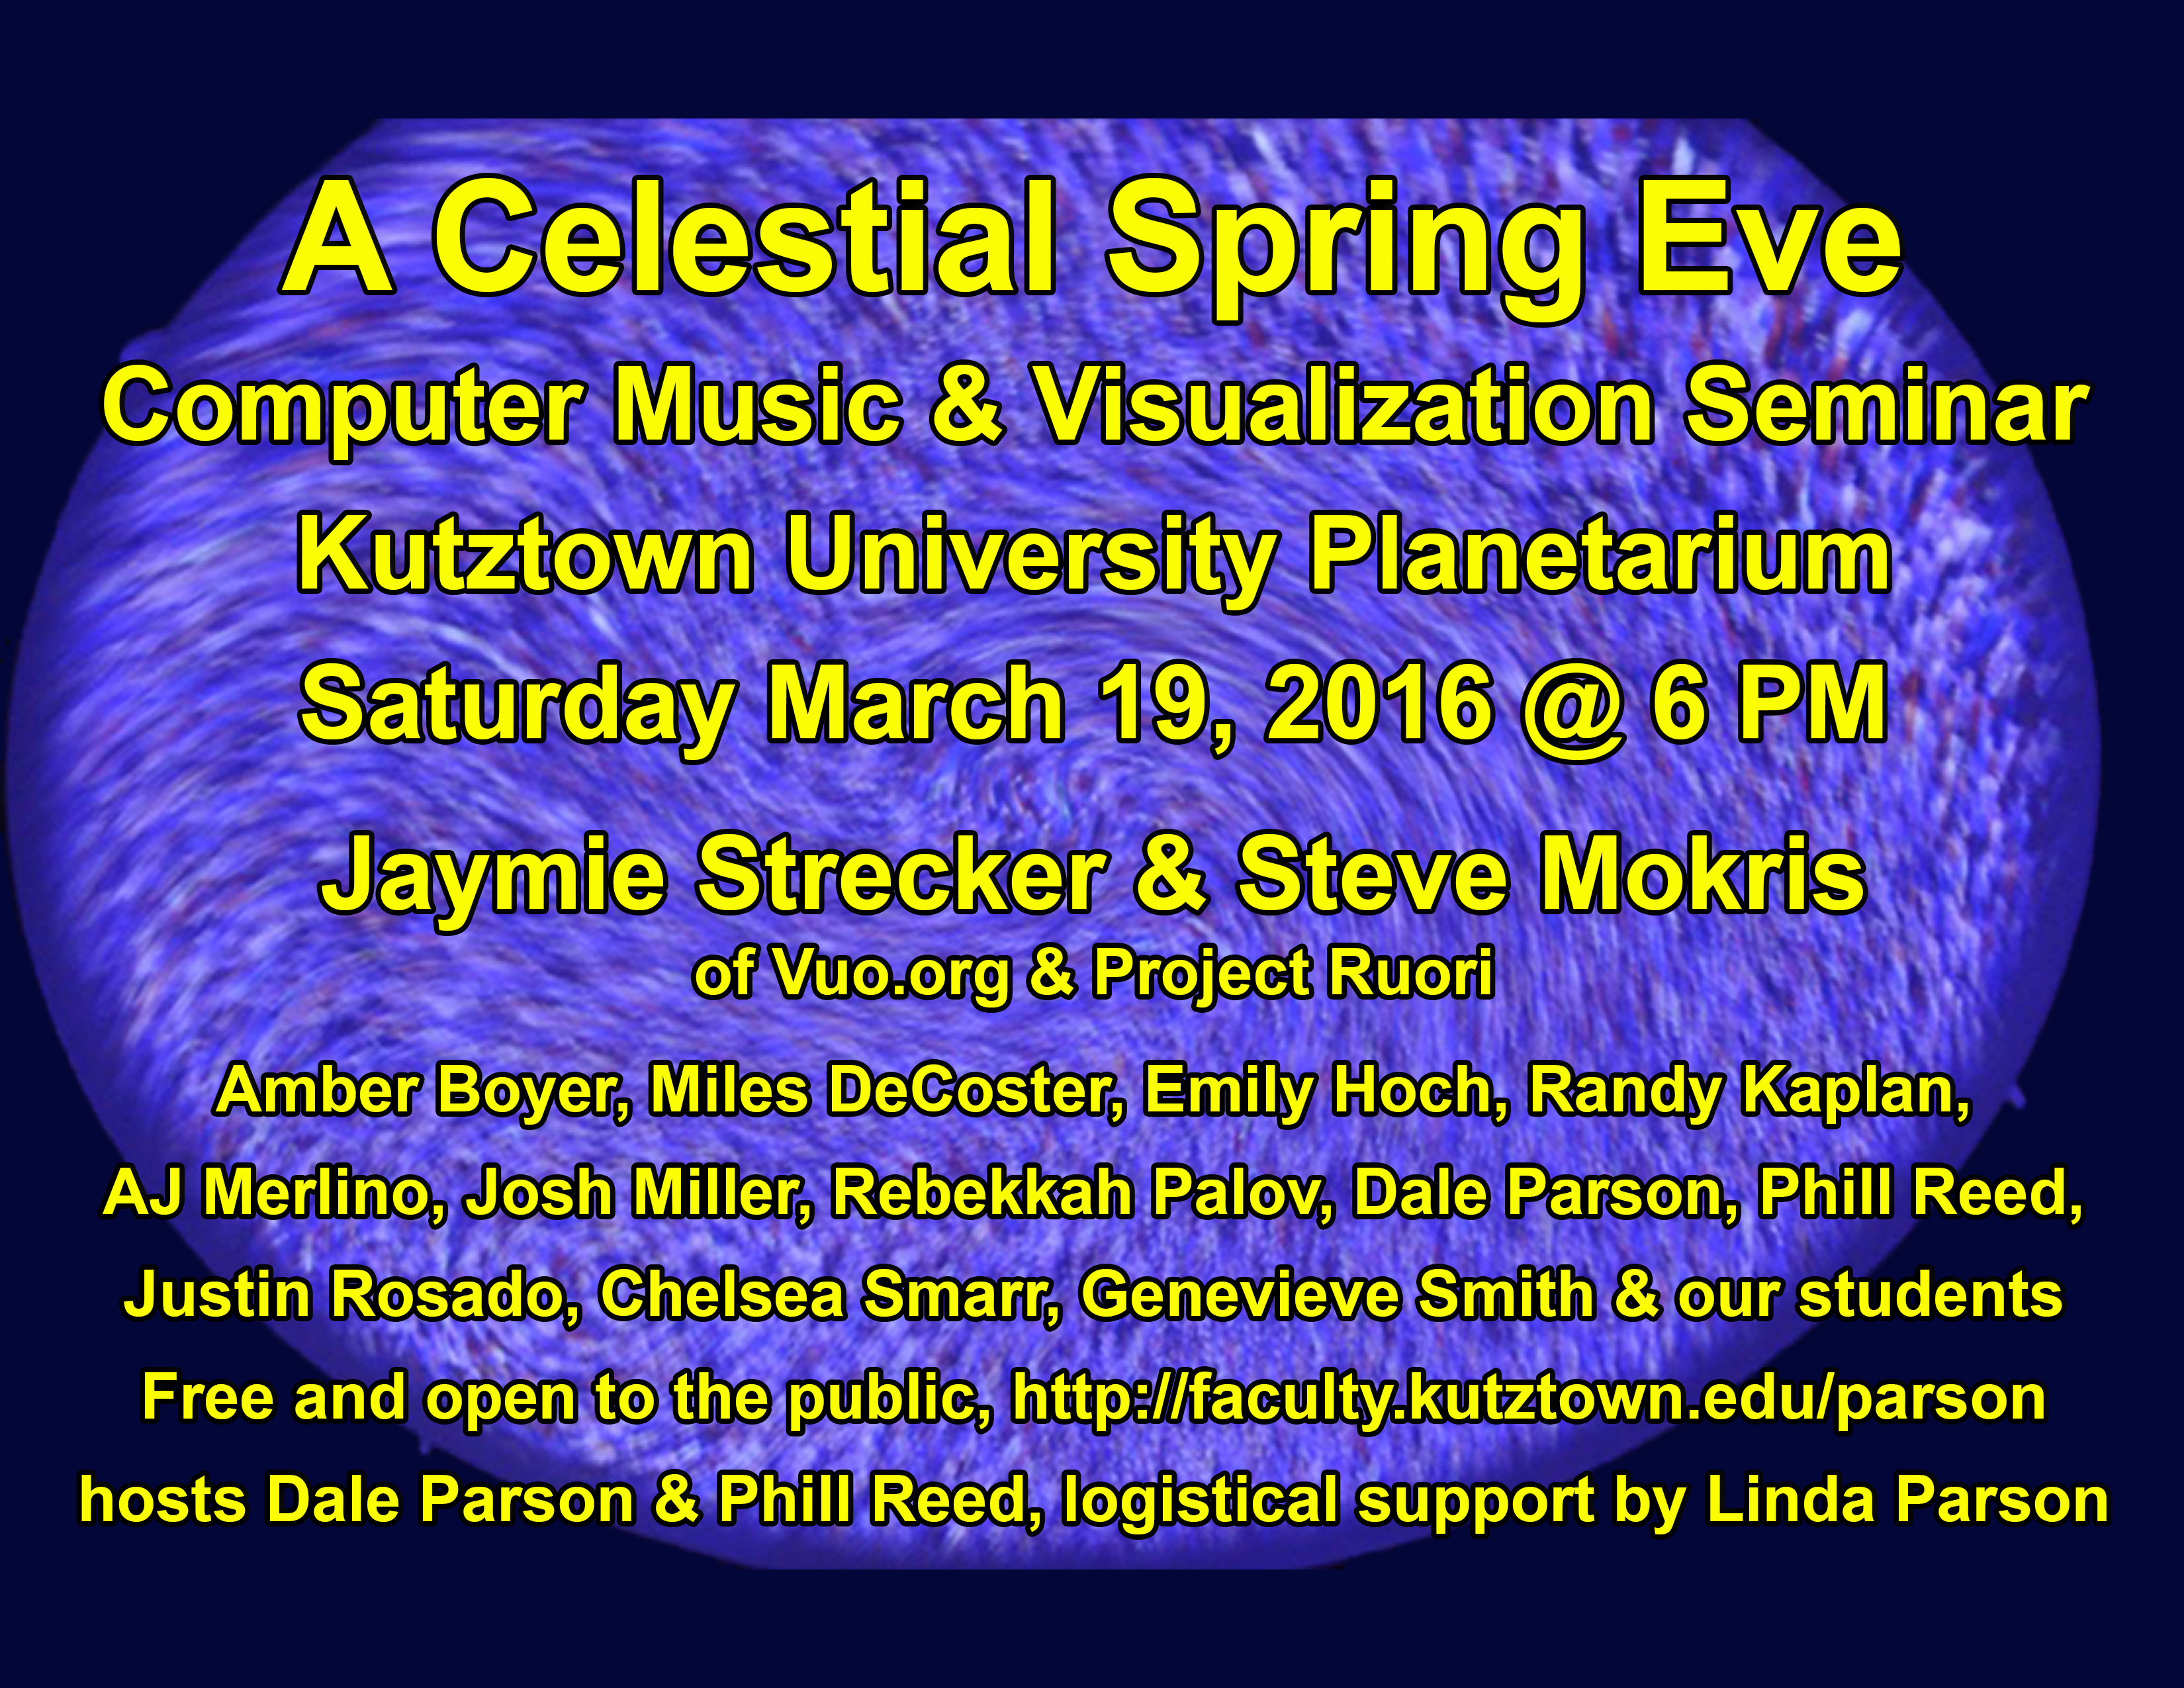 A Celestial Spring Eve, March 19, 2016